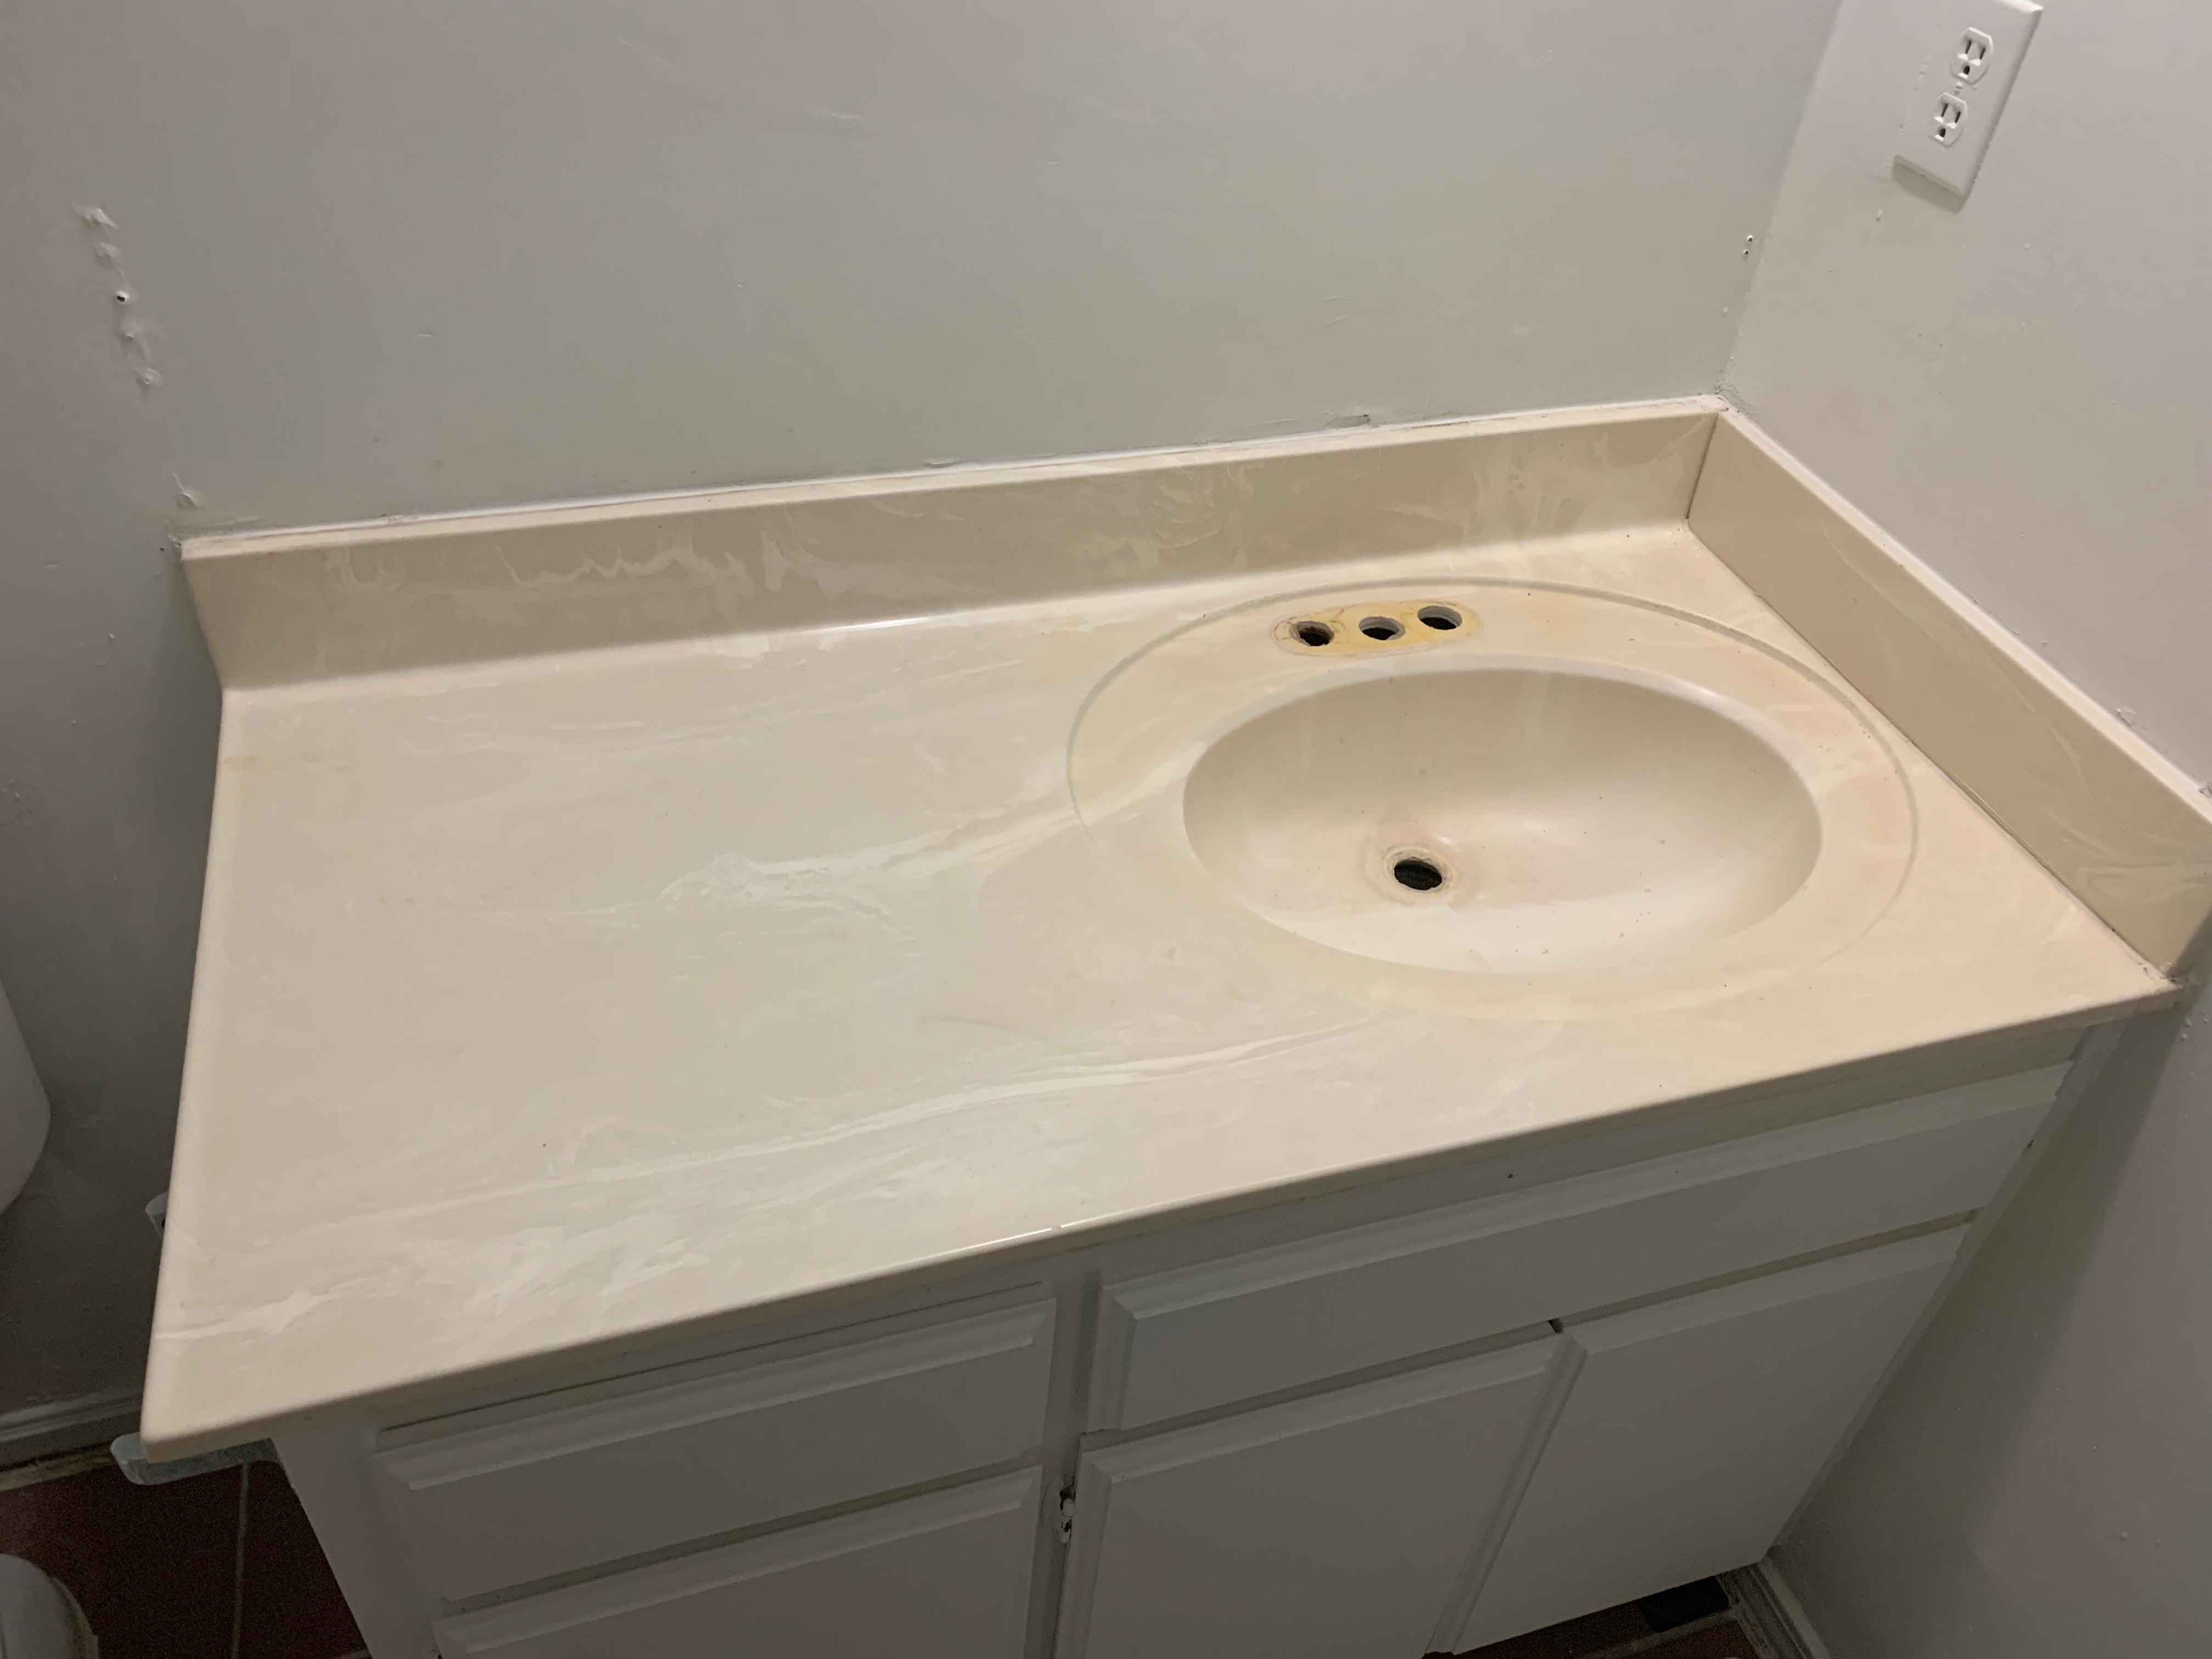 Countertop and sink refinishing before - NuFinishPro